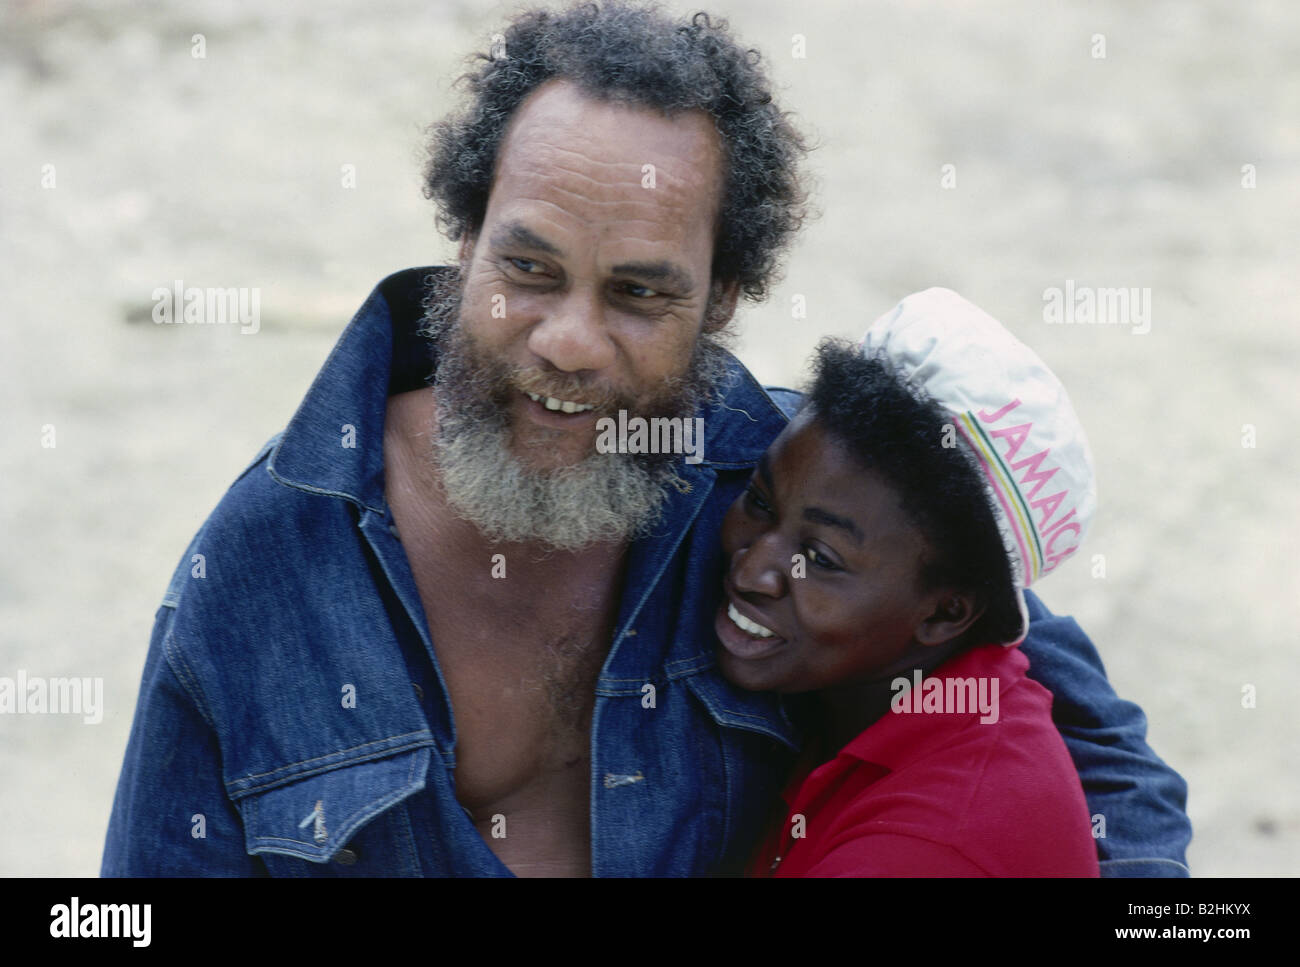 people, couples, Jamaica, native couple, ethnic, ethnology, Central America, Caribbean, Afro-American, CEAM, Stock Photo